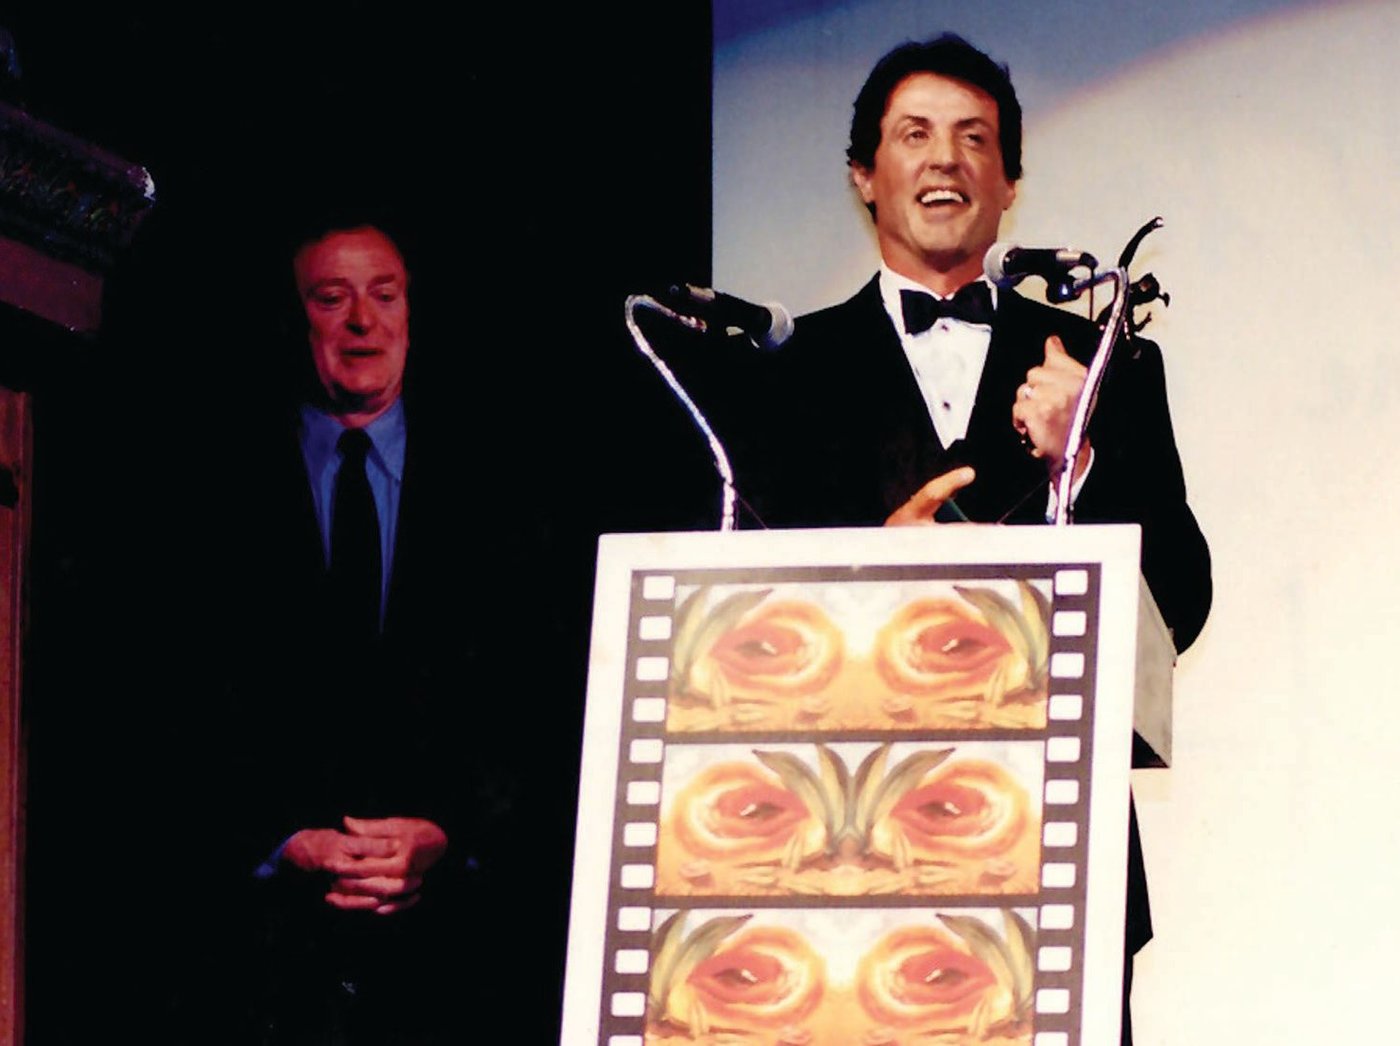 Sylvester Stallone receives a Lifetime Achievement Award from Michael Caine at Miami Film Festival